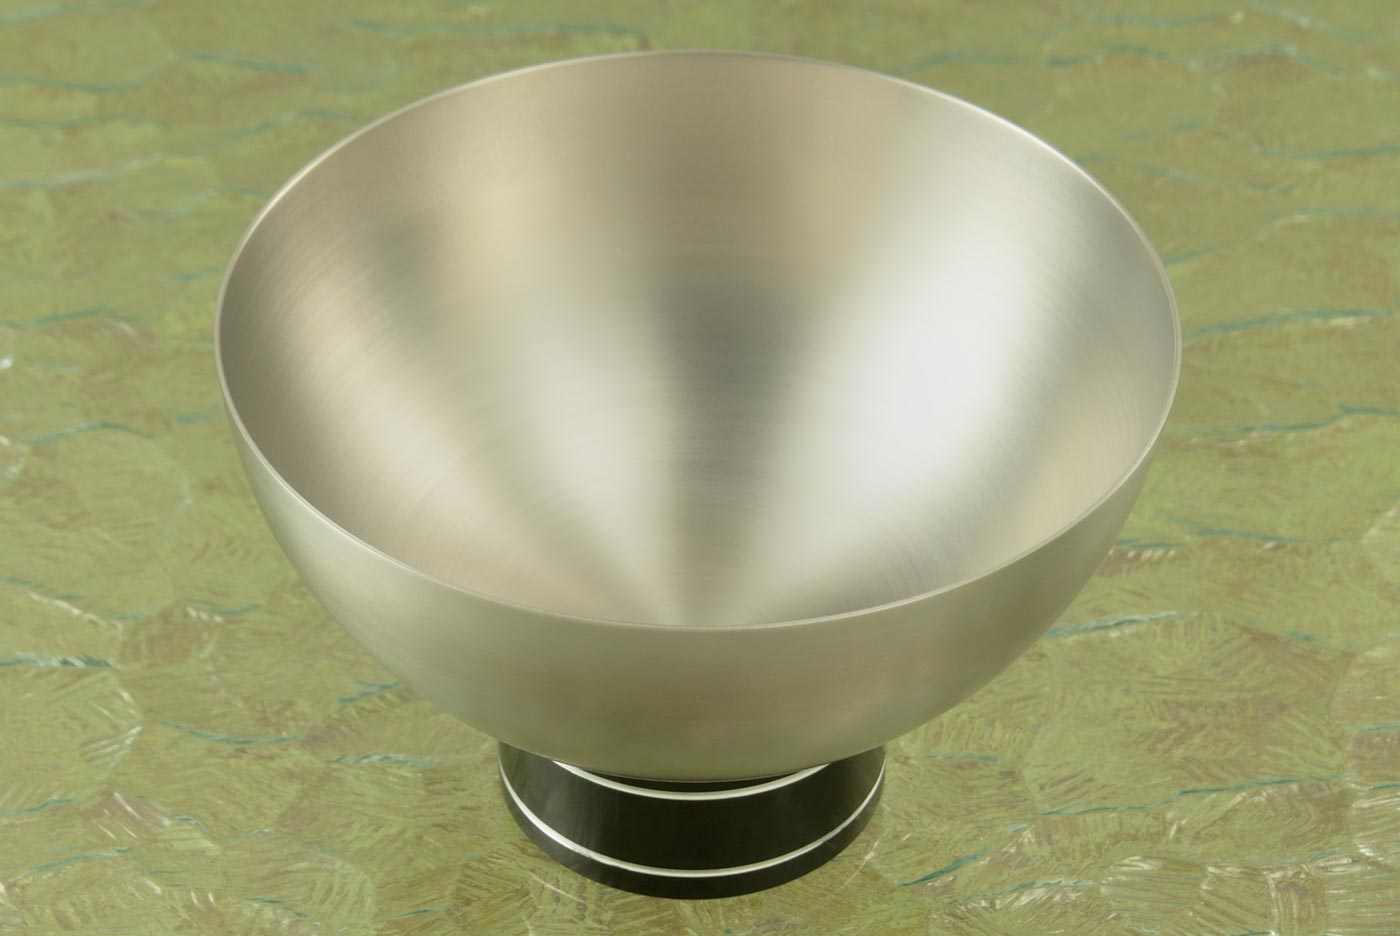 Shave Bowl -- Satin Finished Stainless Steel with Anodized Aluminum Base